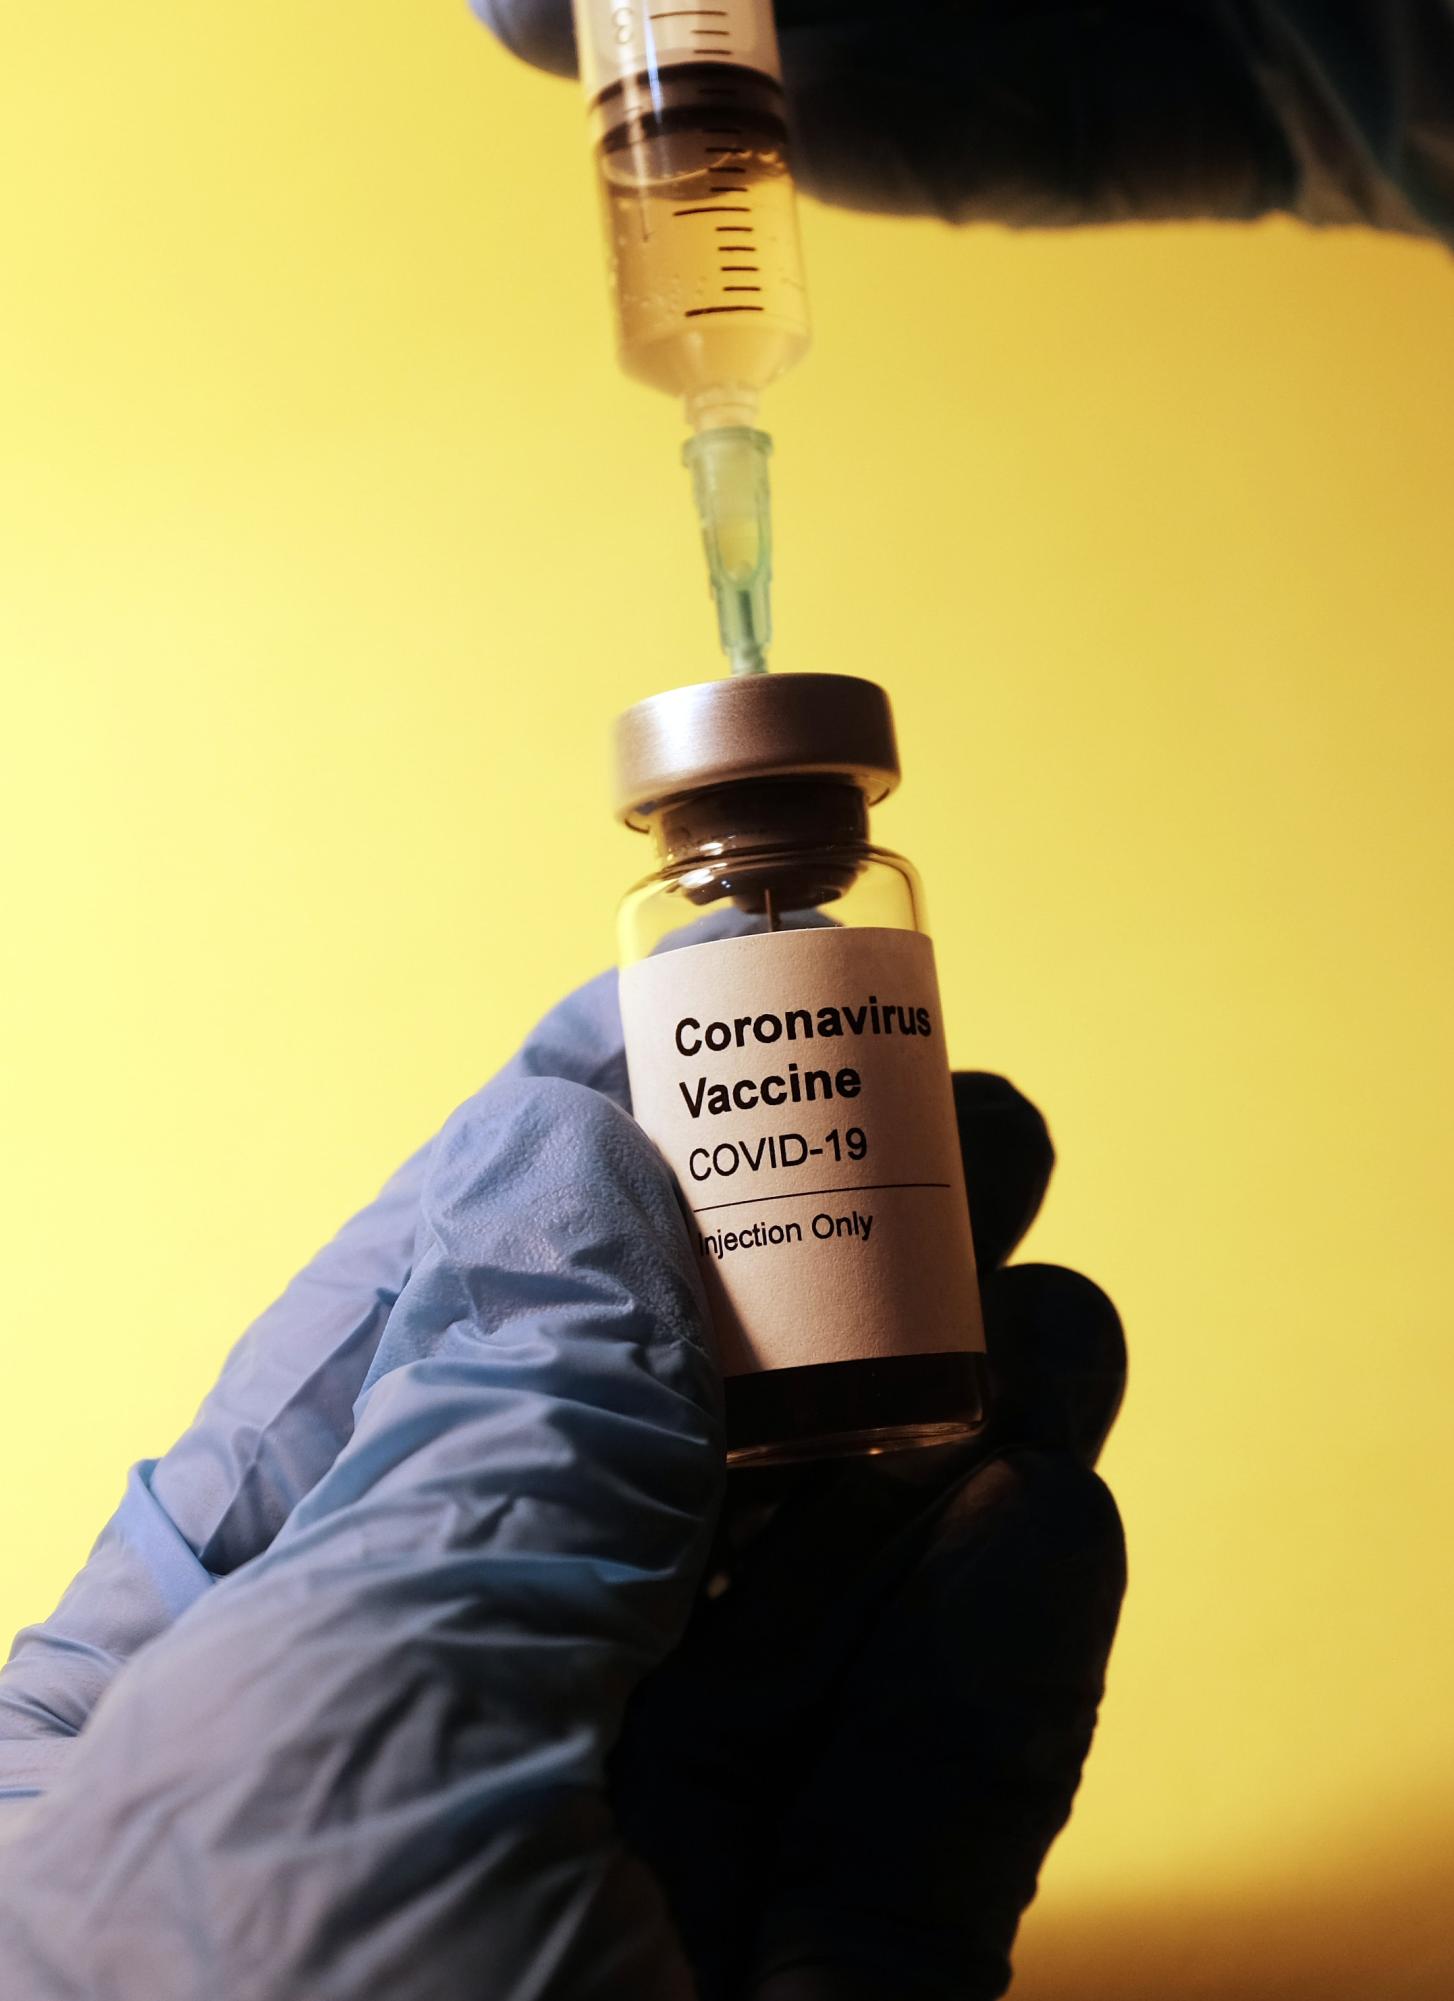 With an improved vaccine to target additional COVID strains, the FDA recommends looking into a booster this fall